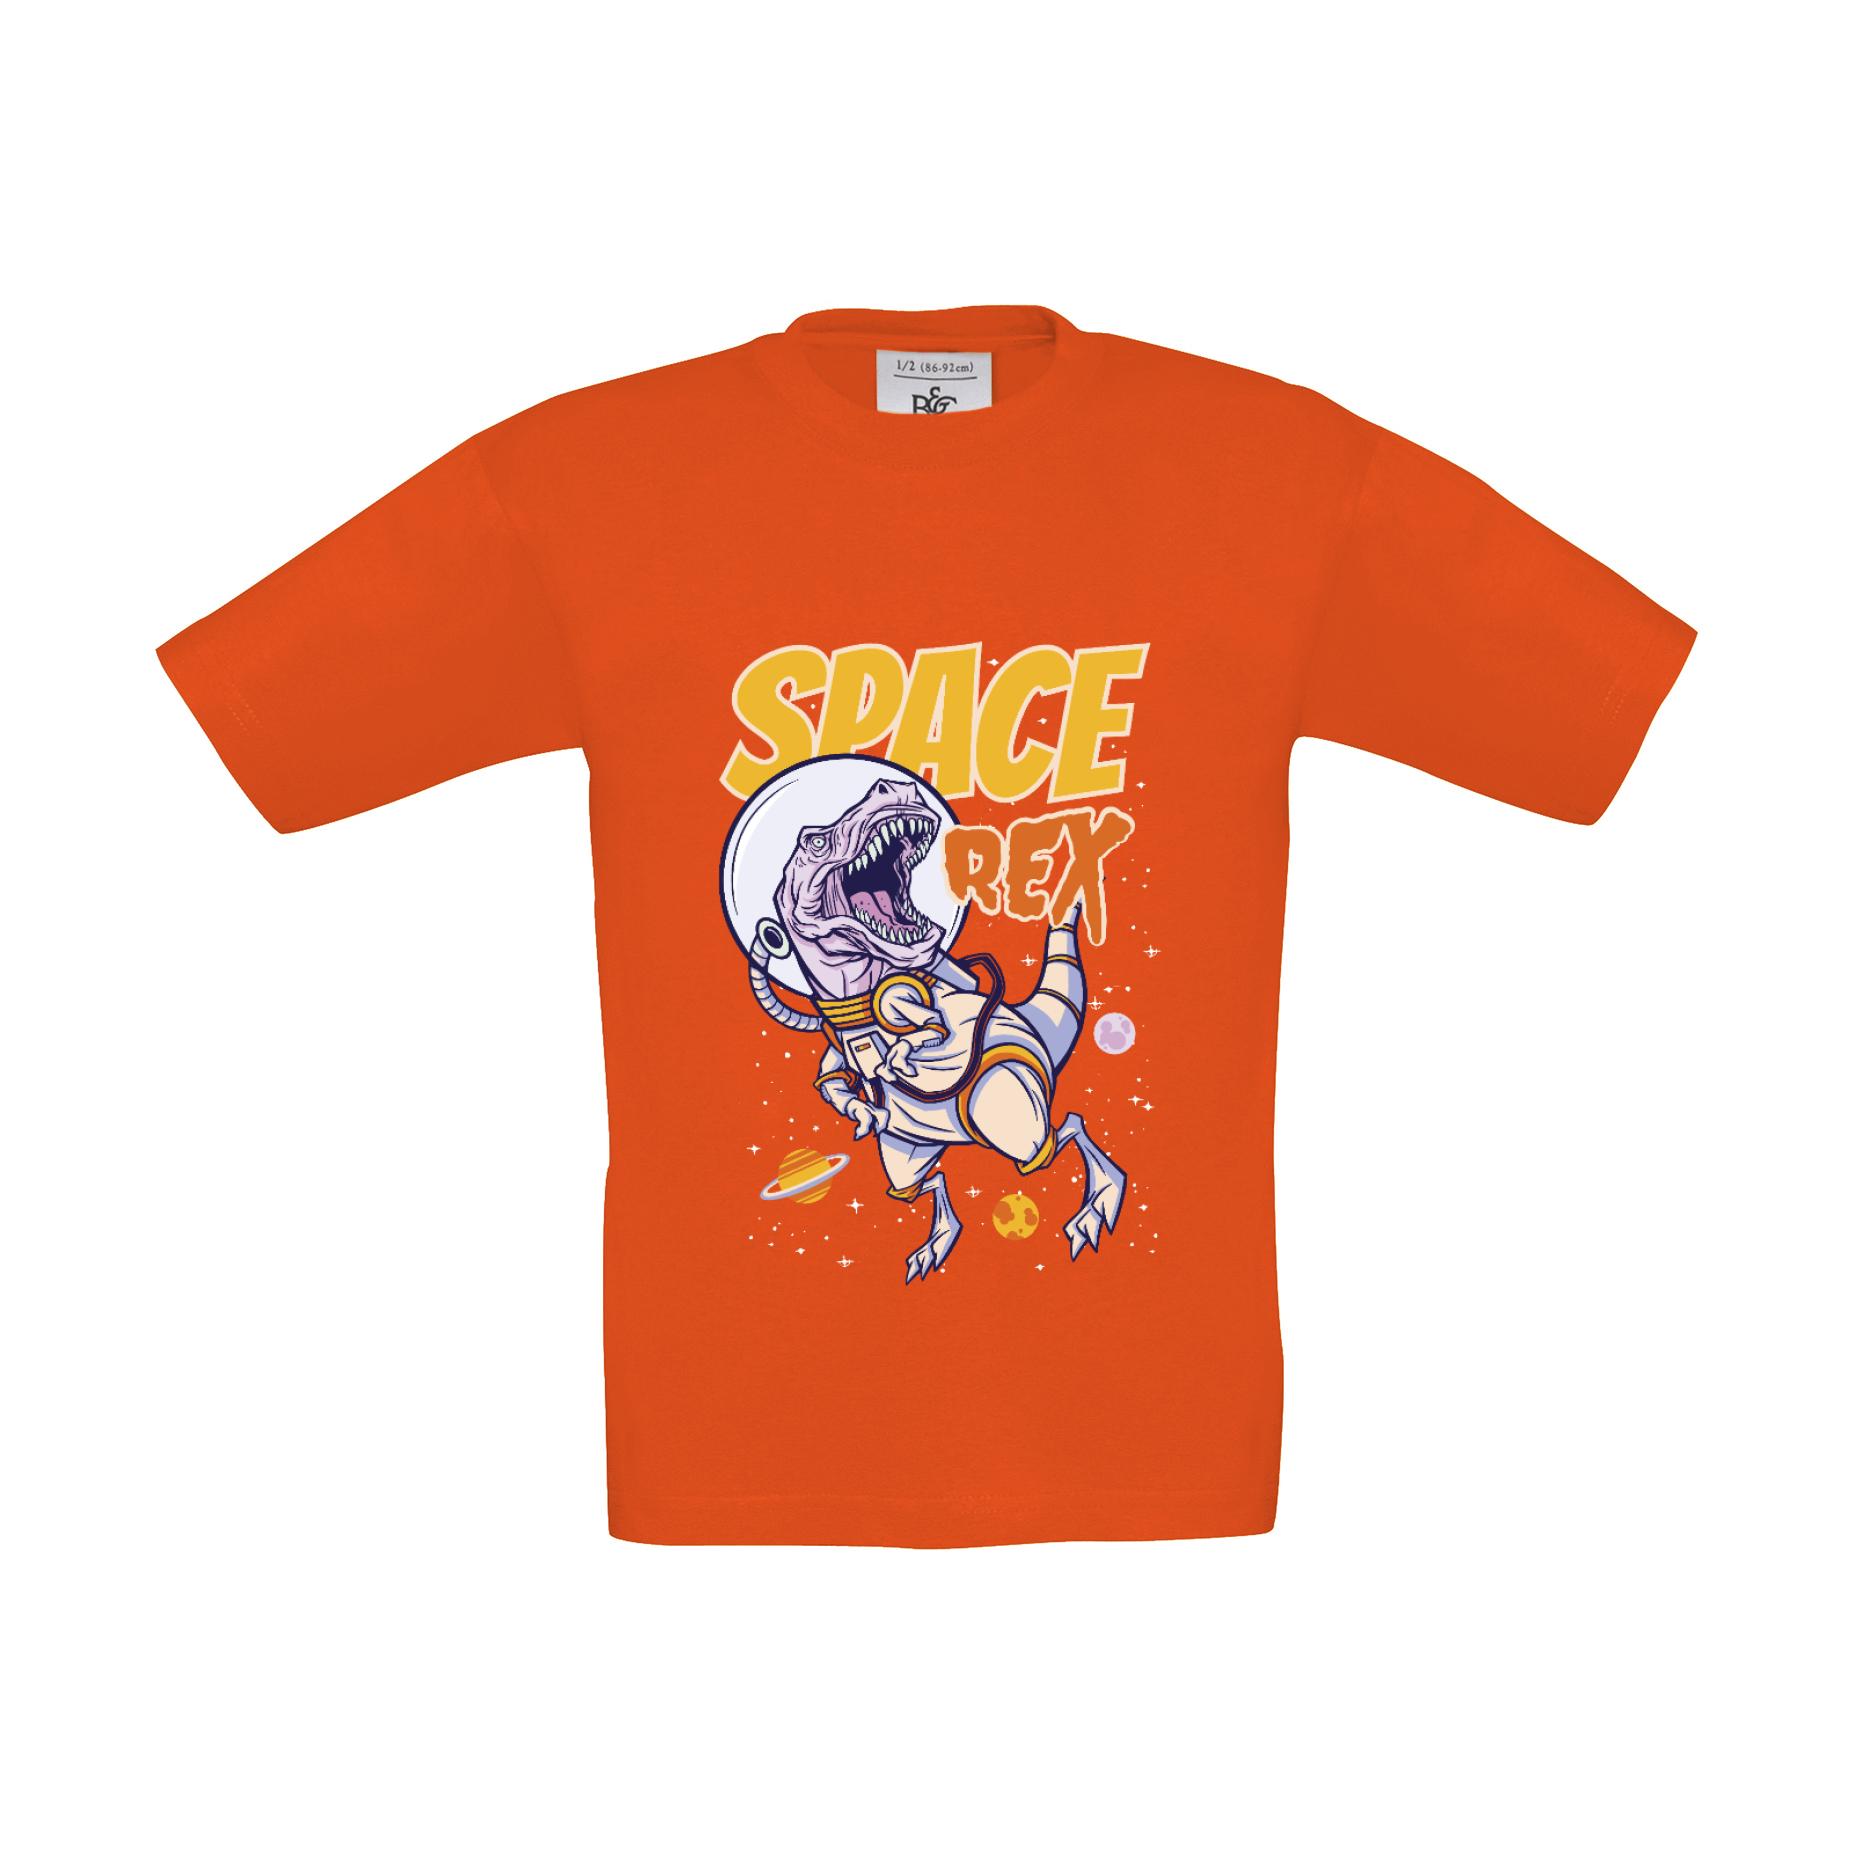 T-Shirt Kinder Dino - T-Rex in Space